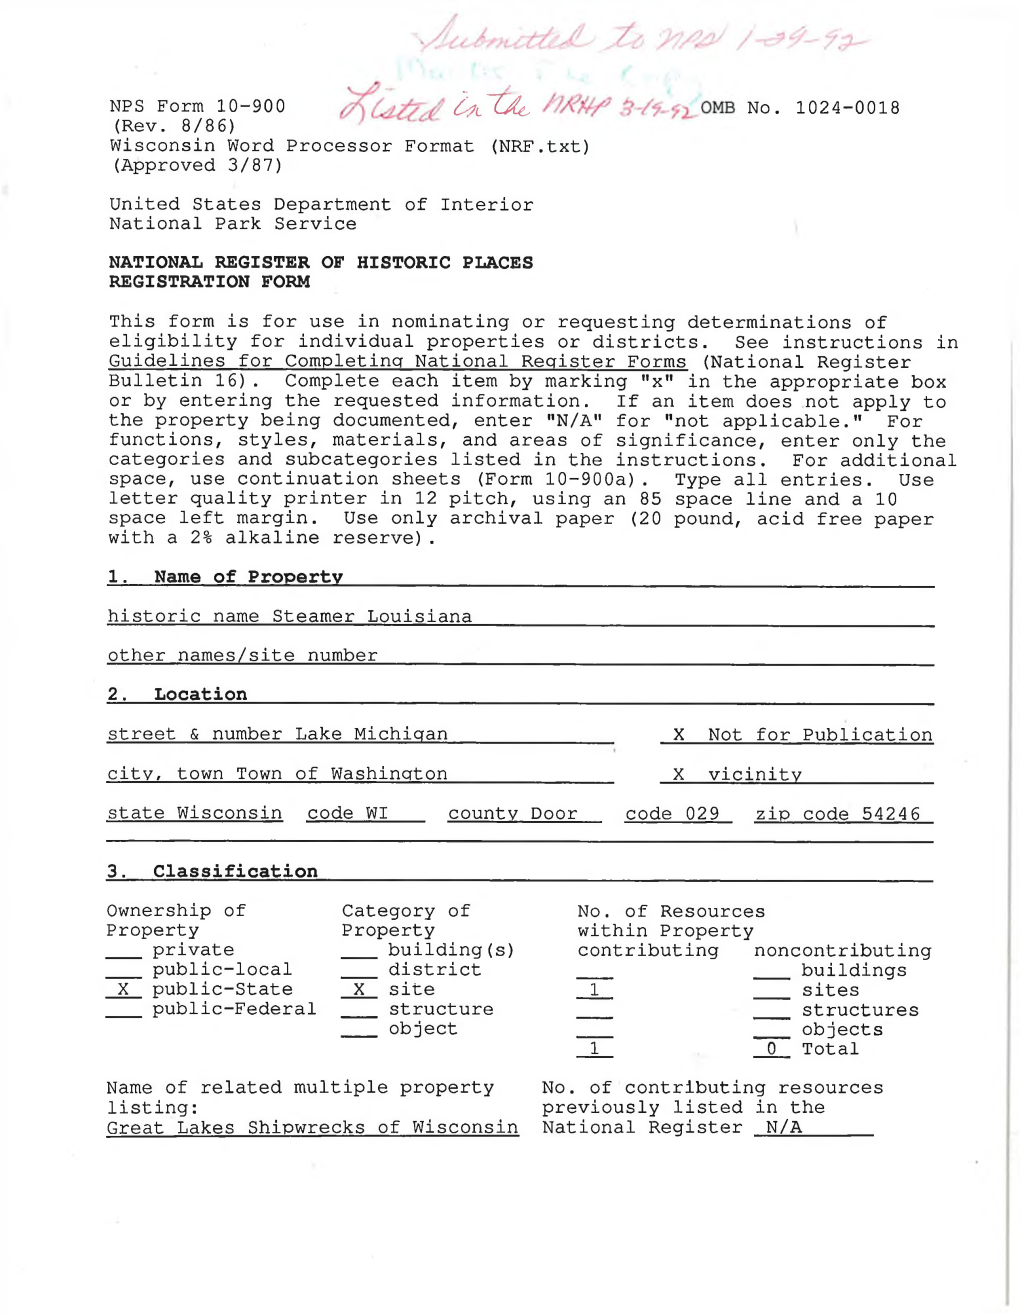 Wisconsin Word Processor Format (NRF.Txt) (Approved 3/87)